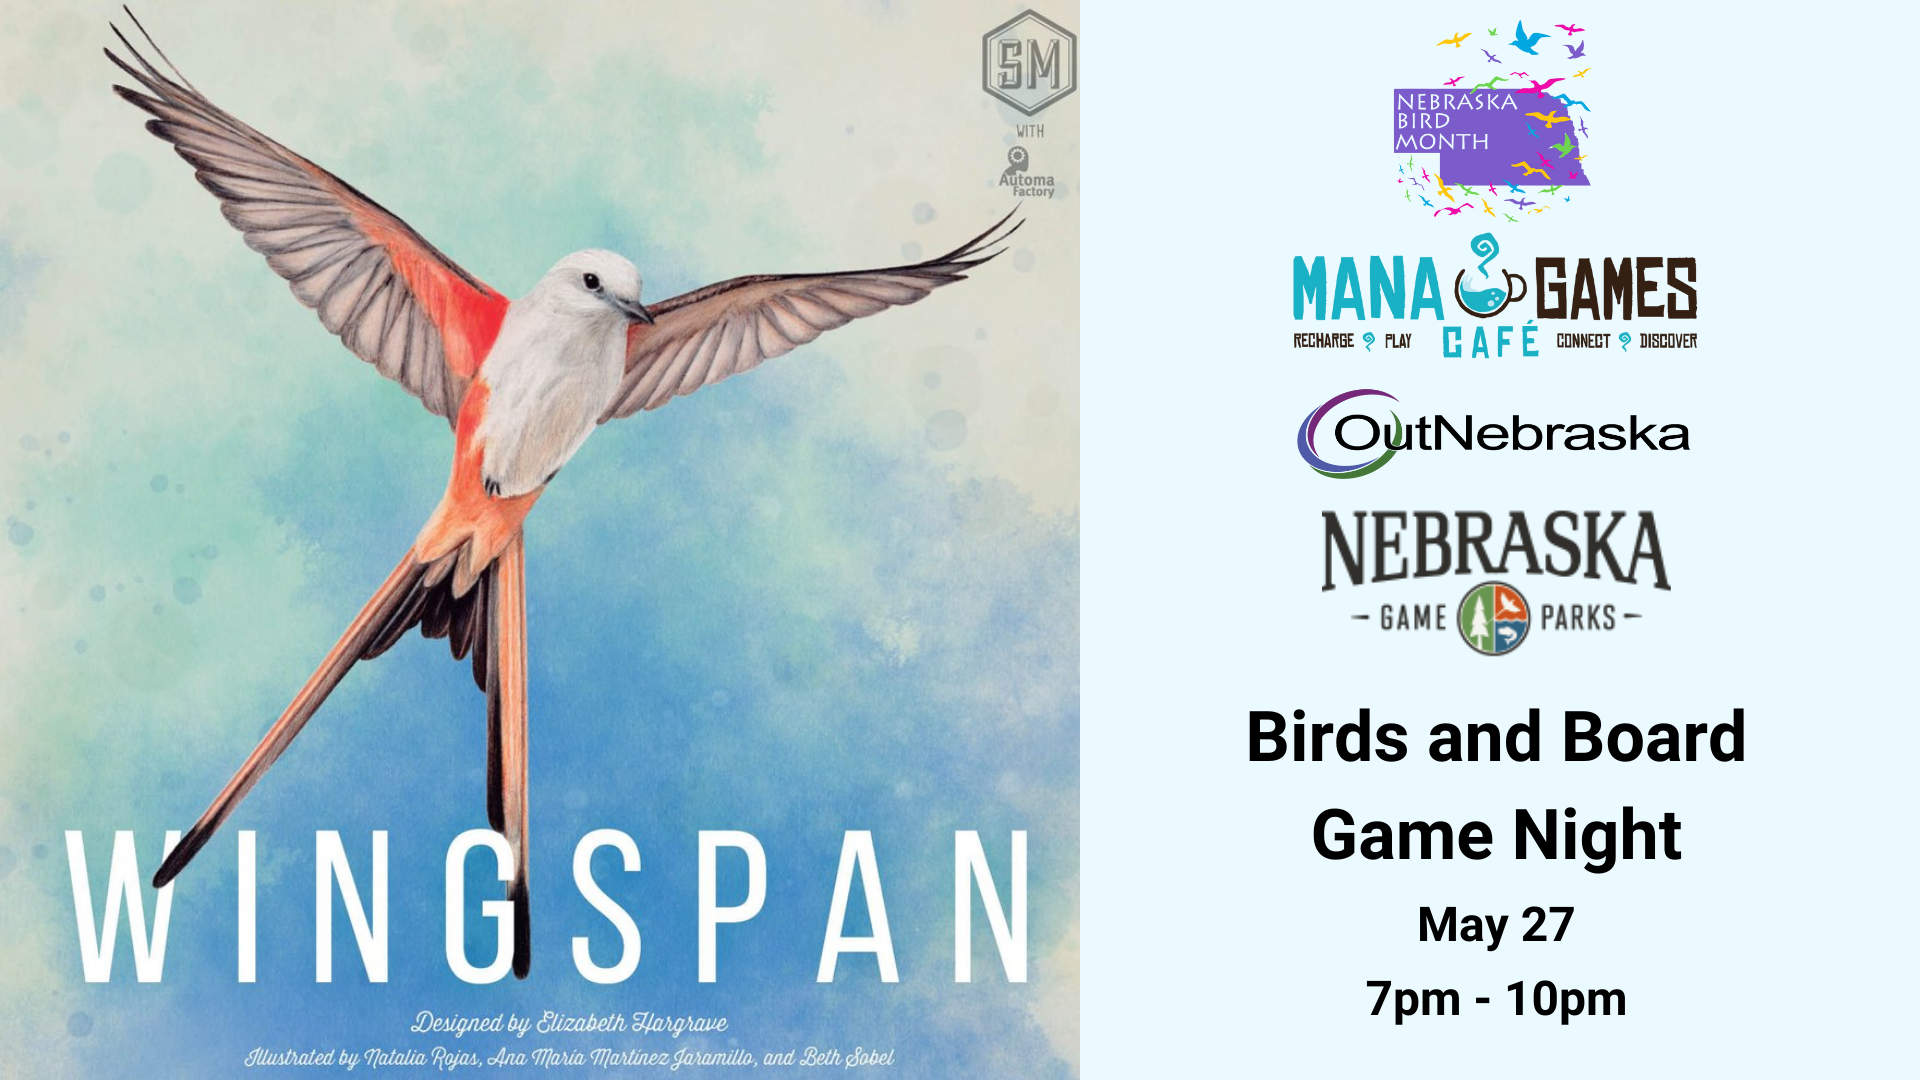 Left: The art for the board game Wingspan, which features a white bird with orange and black tail and wing feathers and the text "Wingspan. Designed by Elizabeth Hargrave. Illustrated by Natalia Rajas, Ana Maria Martinez Jaramillo, and Beth Sabel" | Right: Nebraska Bird Month logo, Mana Games logo, OutNebraska logo, Nebraska Game and Parks logo. Text: Birds and Board Game Night. May 27, 7pm - 10pm.